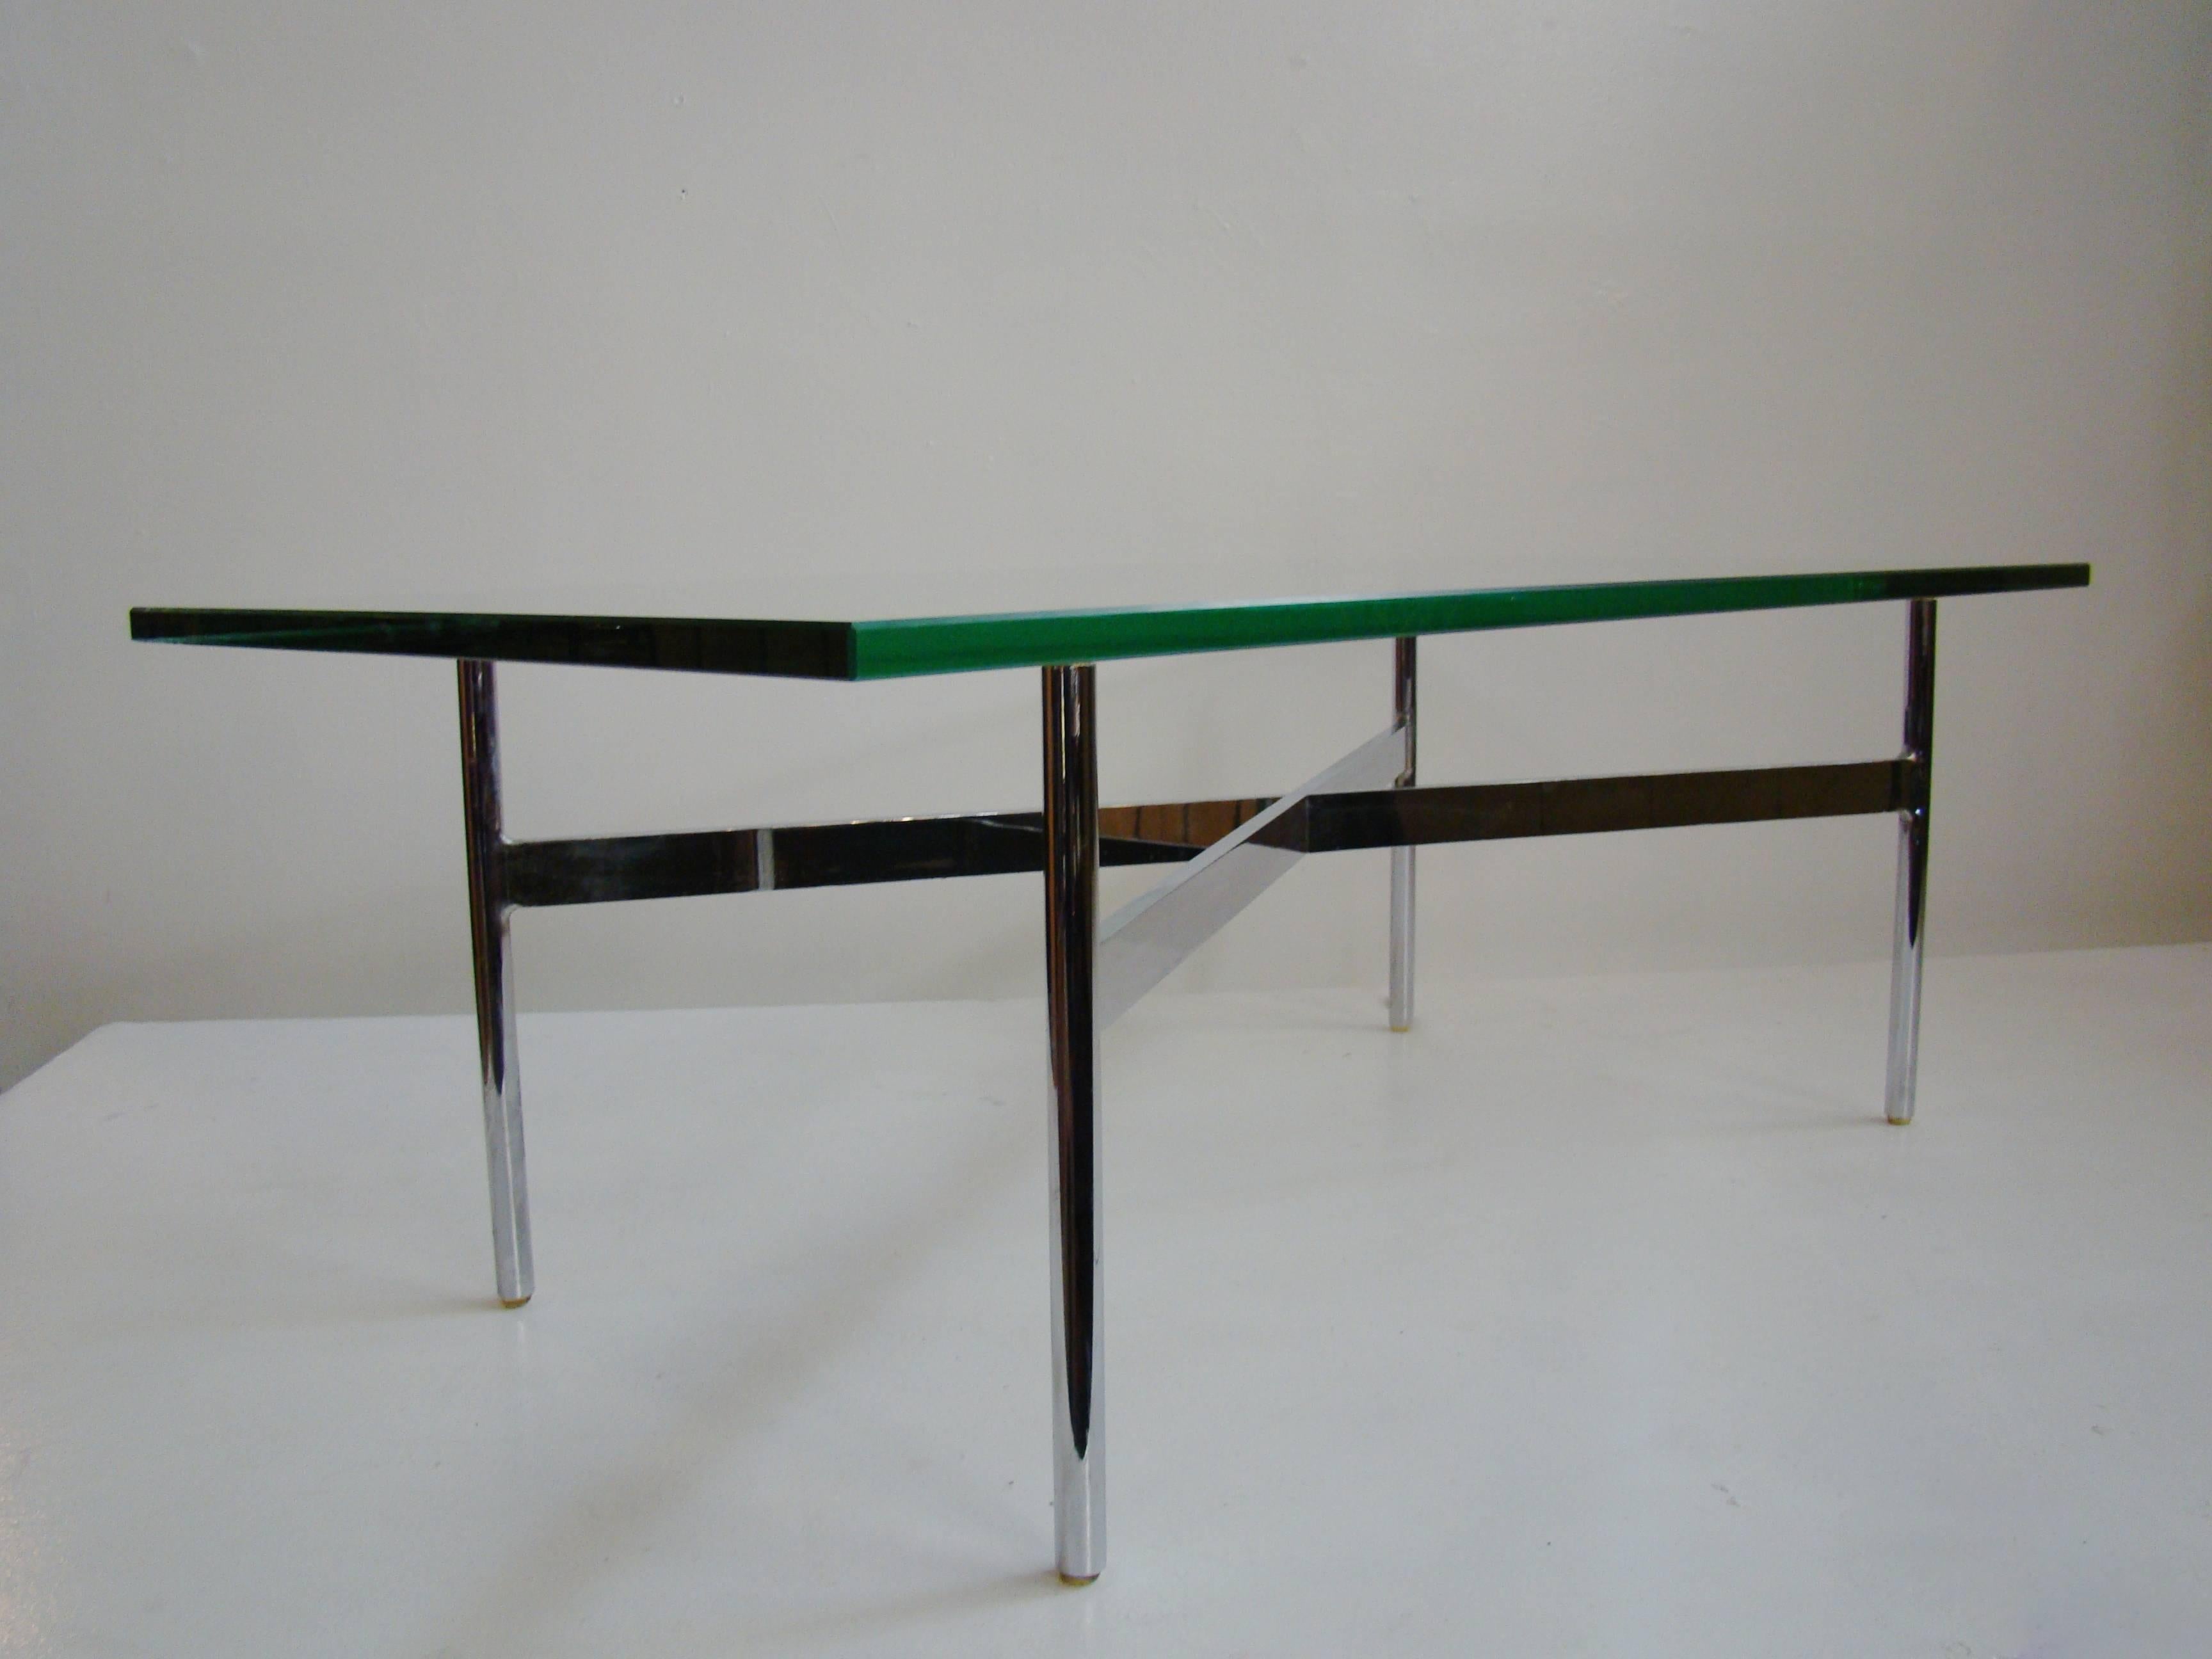 Stunning, simple design (the "New York" series, circa 1962) with perfect proportions executed in solid chrome plated bar steel and original chartreuse polished edge plate glass top.

The table is being offered with the original glass